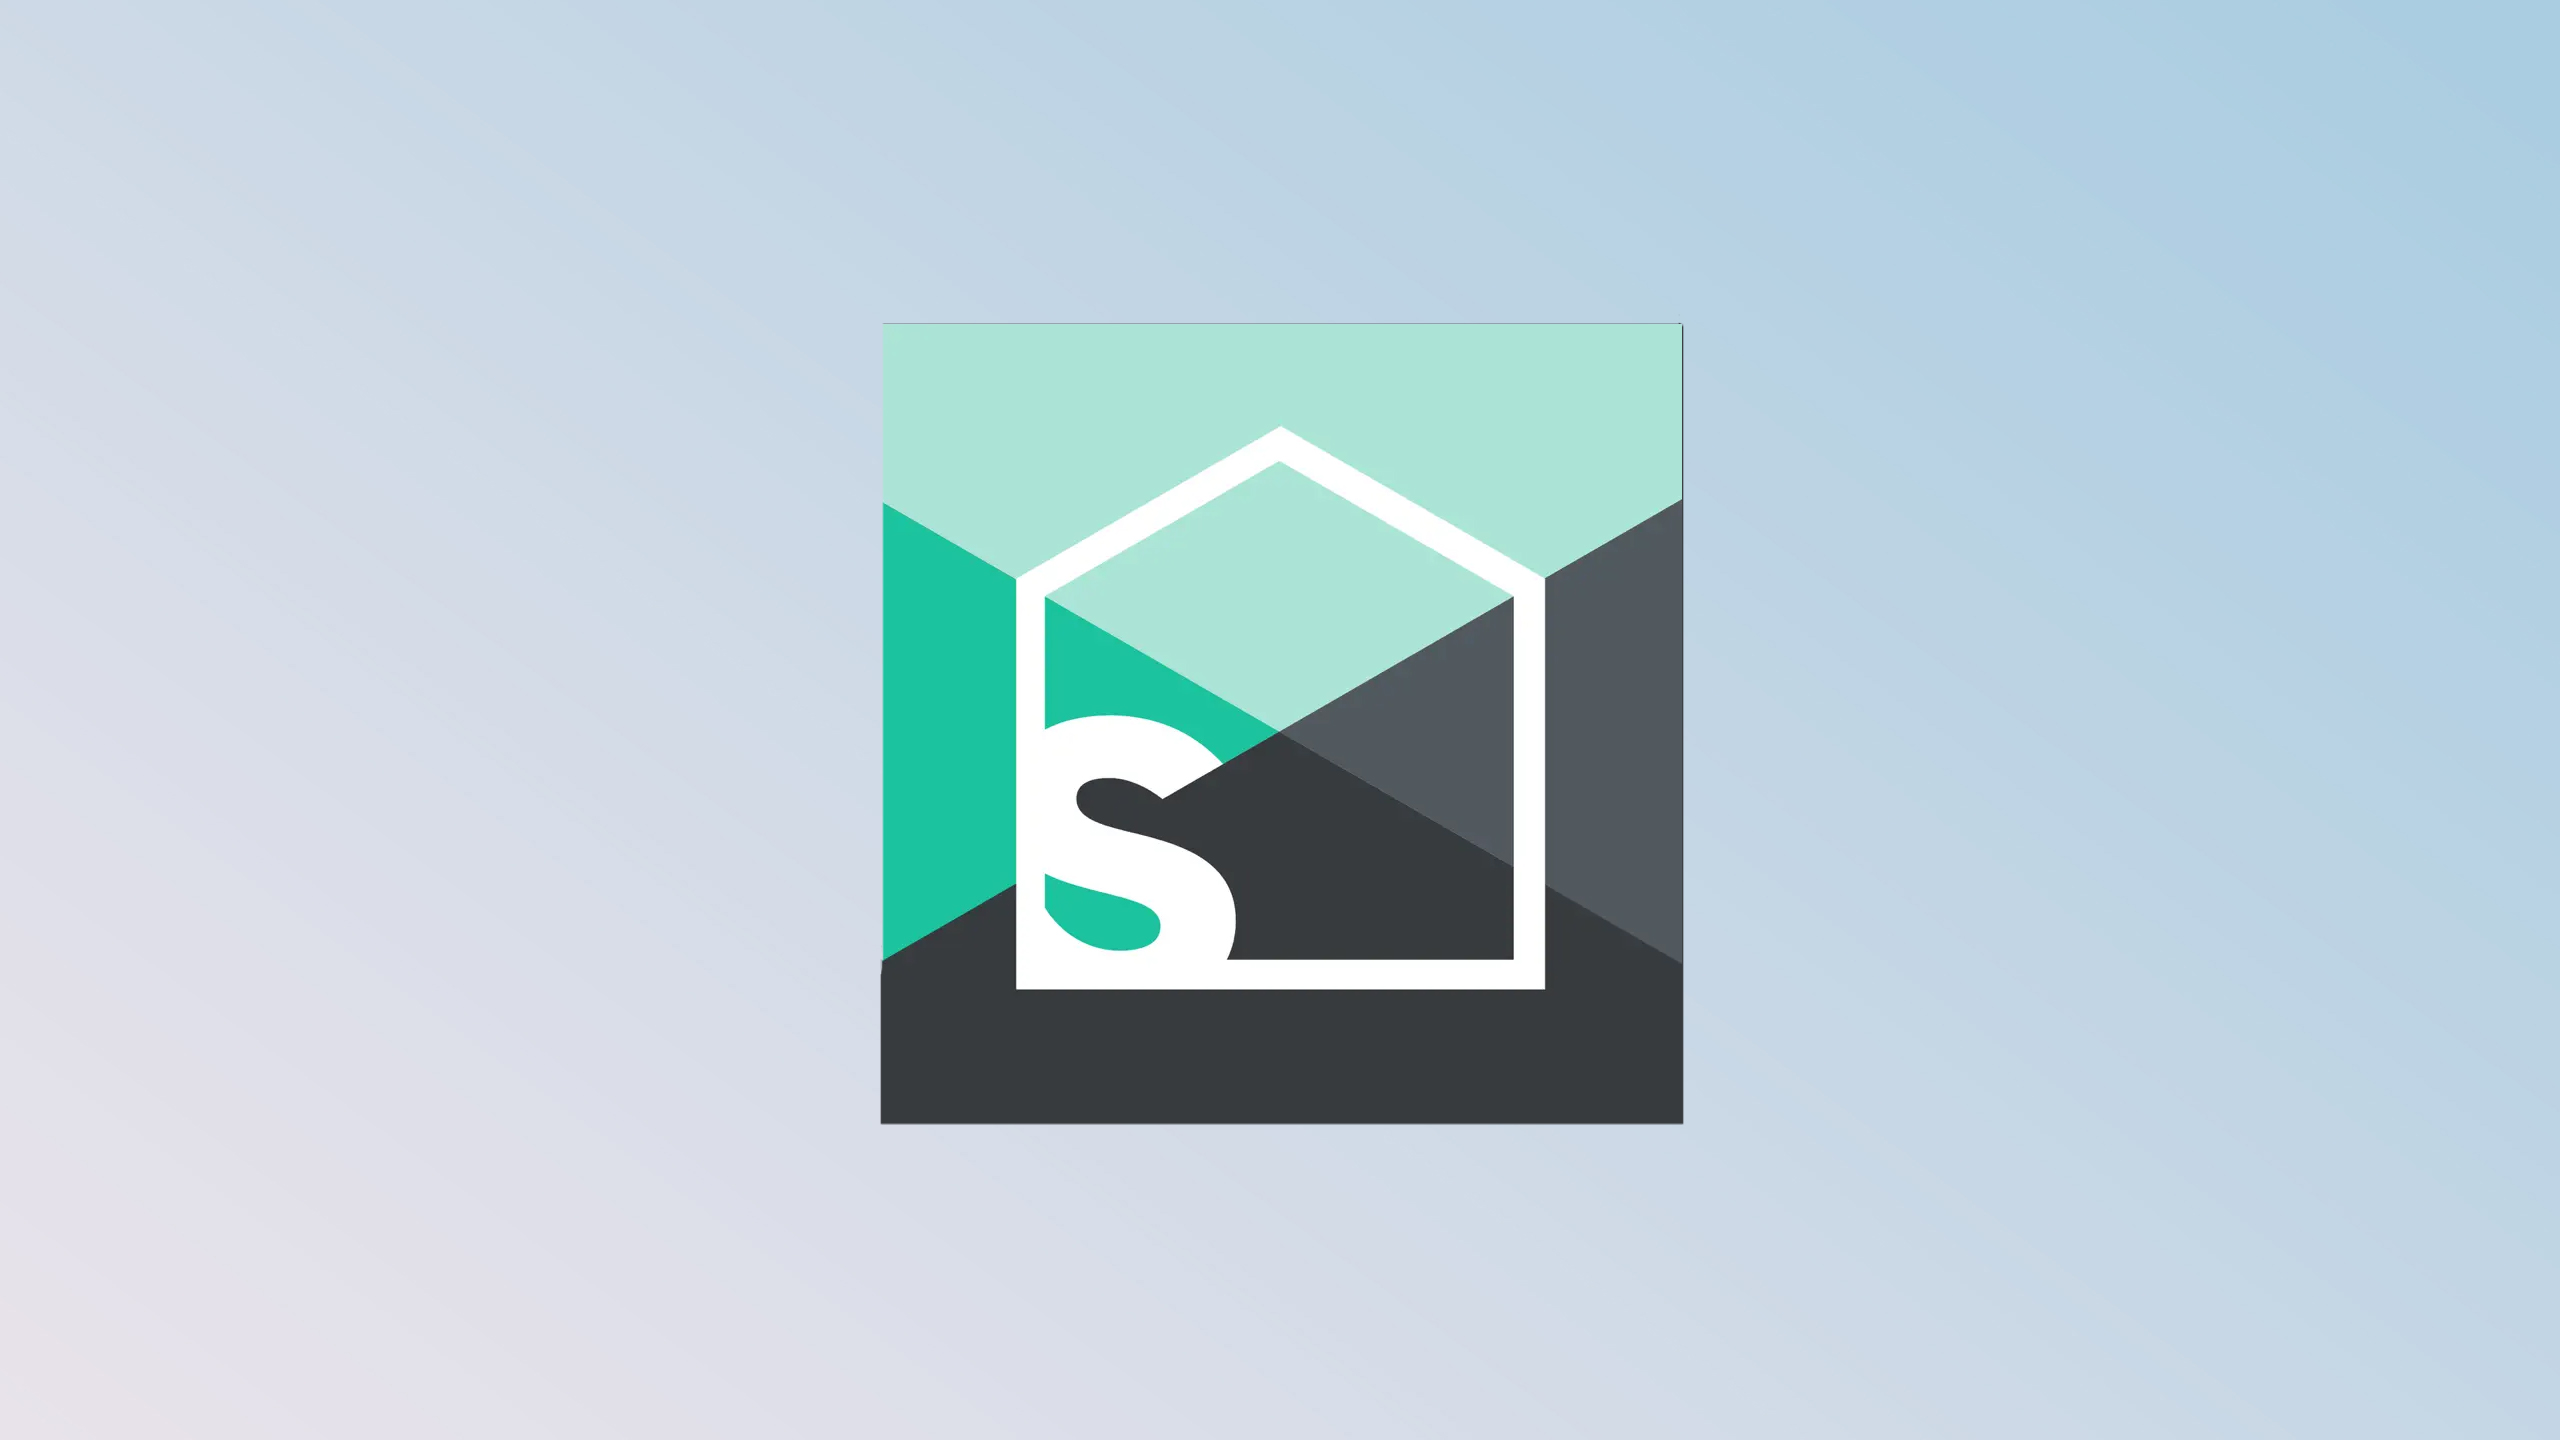 The Splitwise logo on a pale blue background